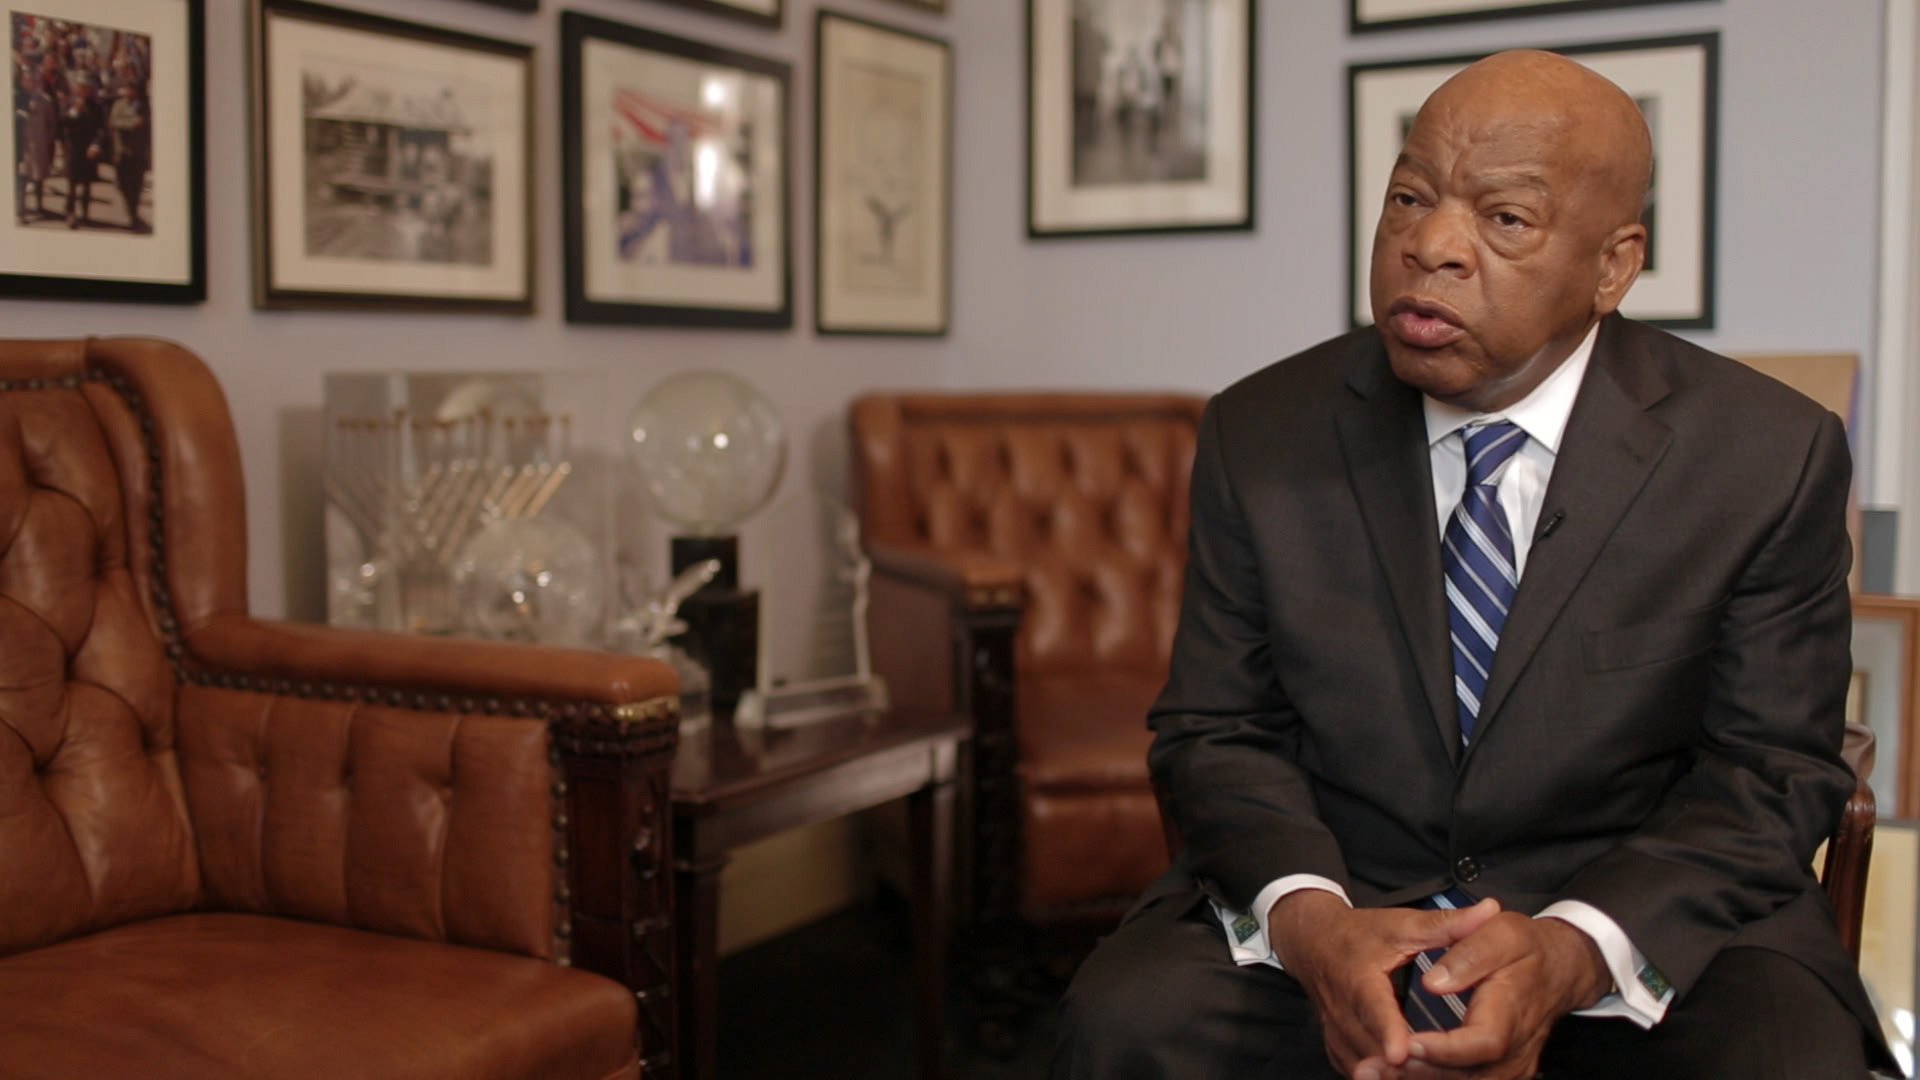 BREATH OF FREEDOM features an interview with late Congressman John Lewis